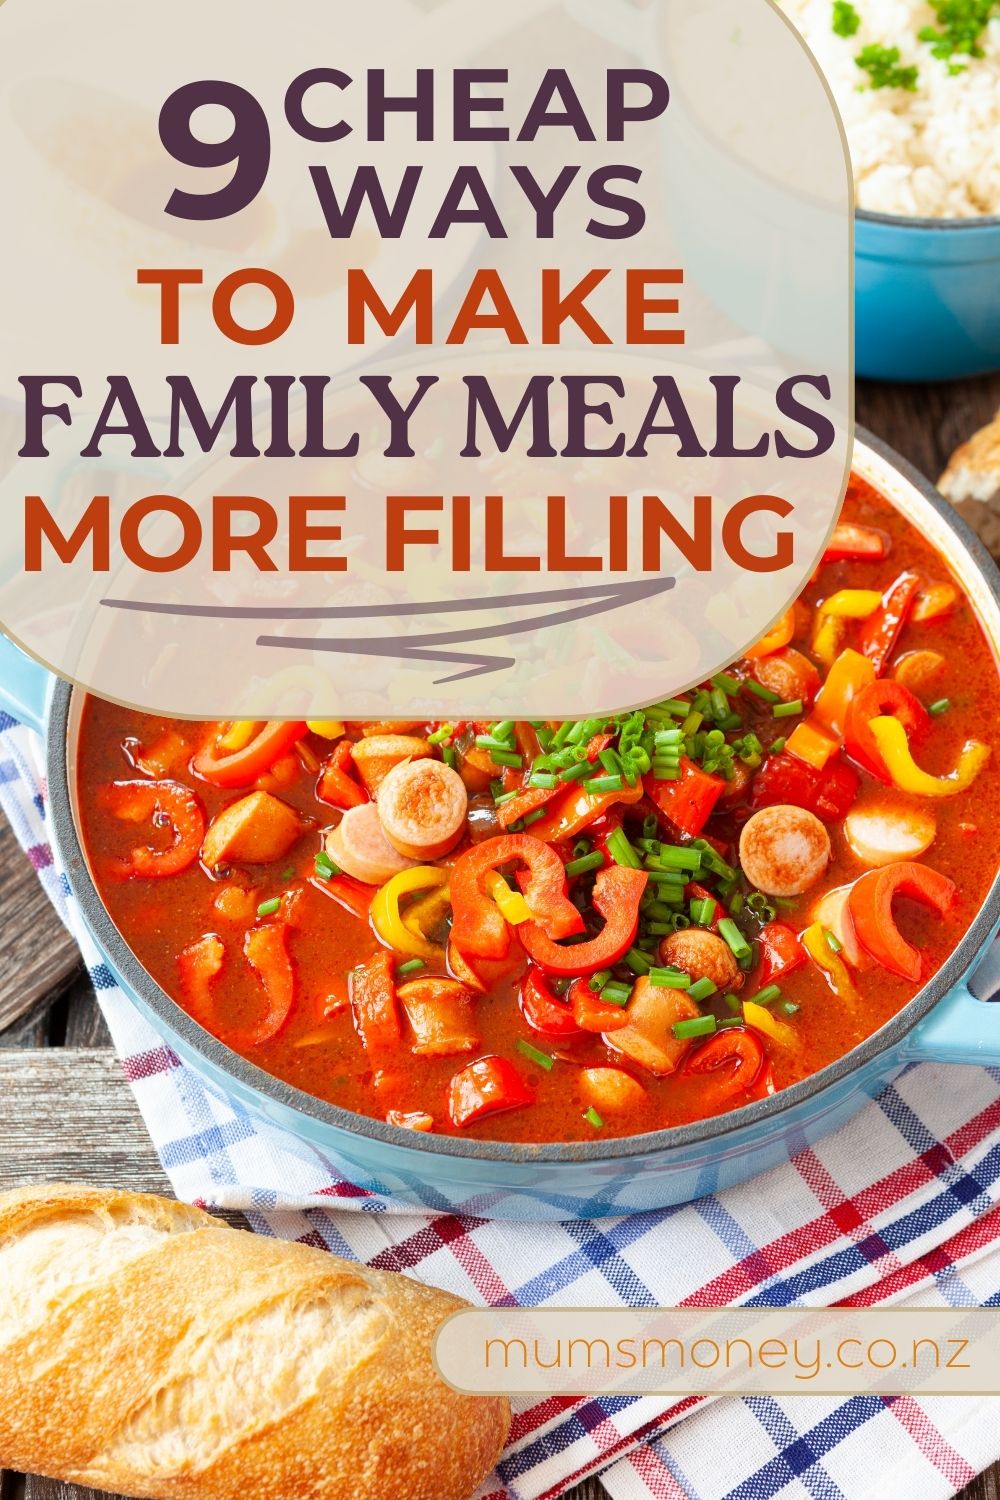  Cheap Ways to Make Family Meals More Filling